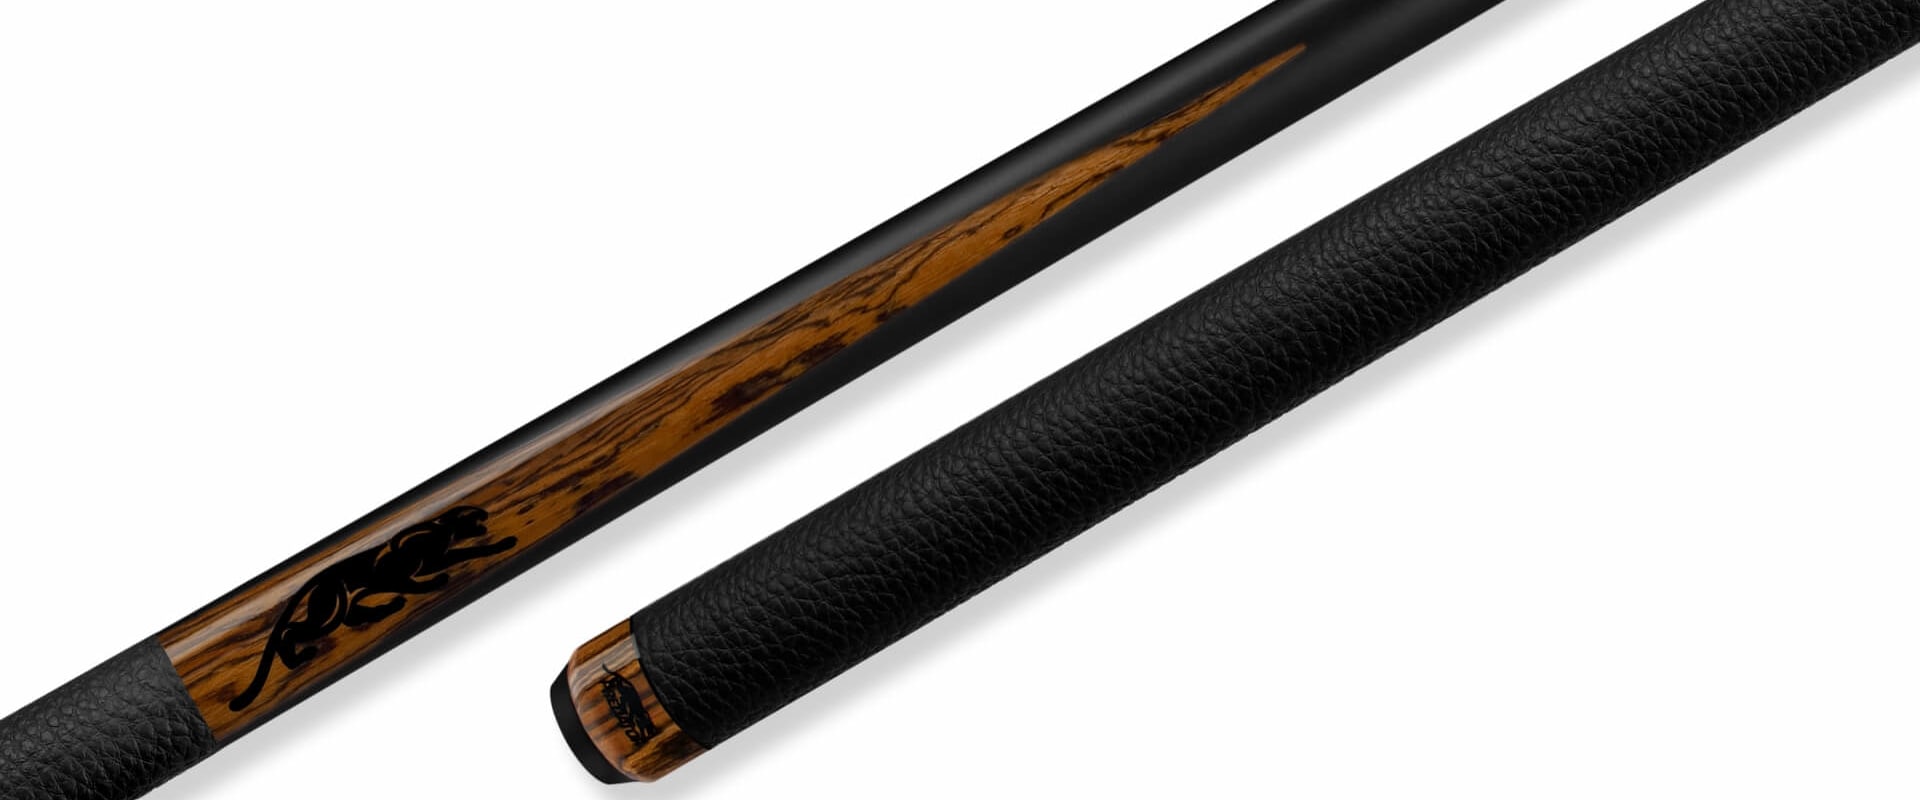 Pool cues for sale near me?